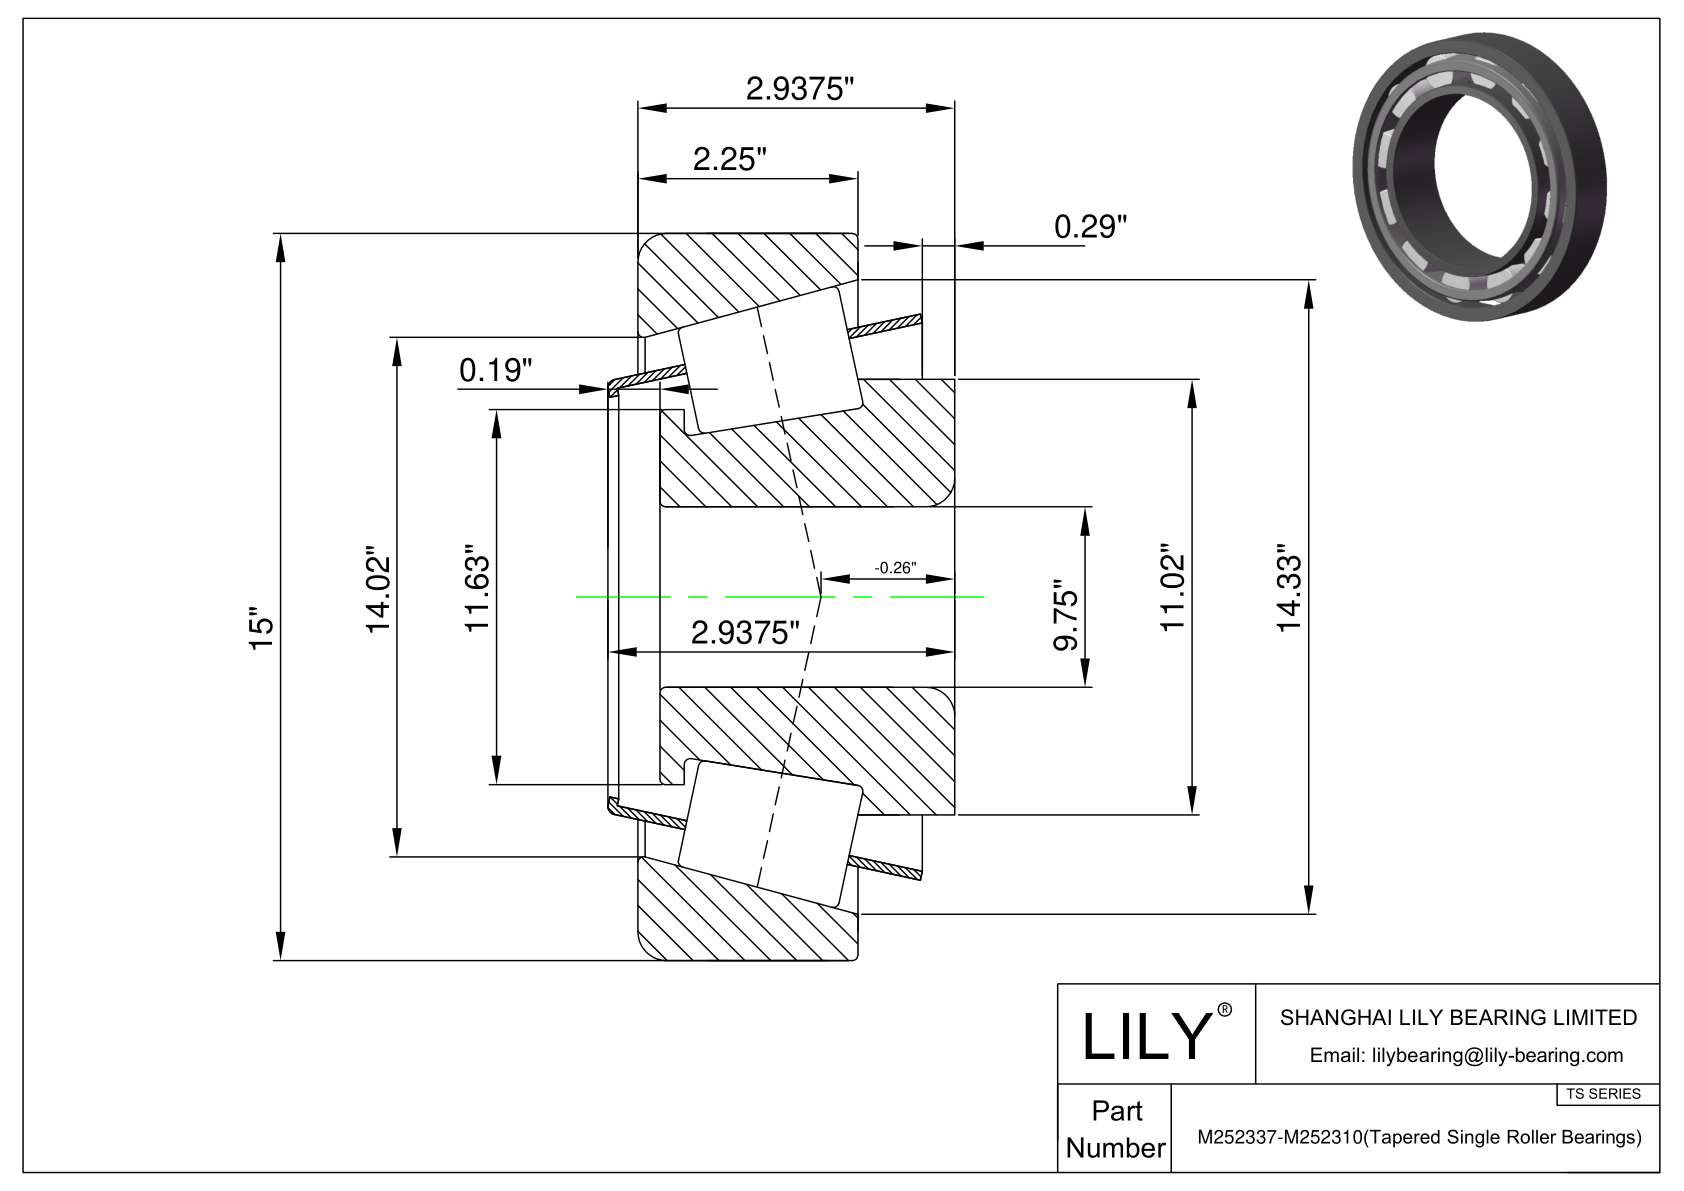 M252337-M252310 TS (Tapered Single Roller Bearings) (Imperial) cad drawing